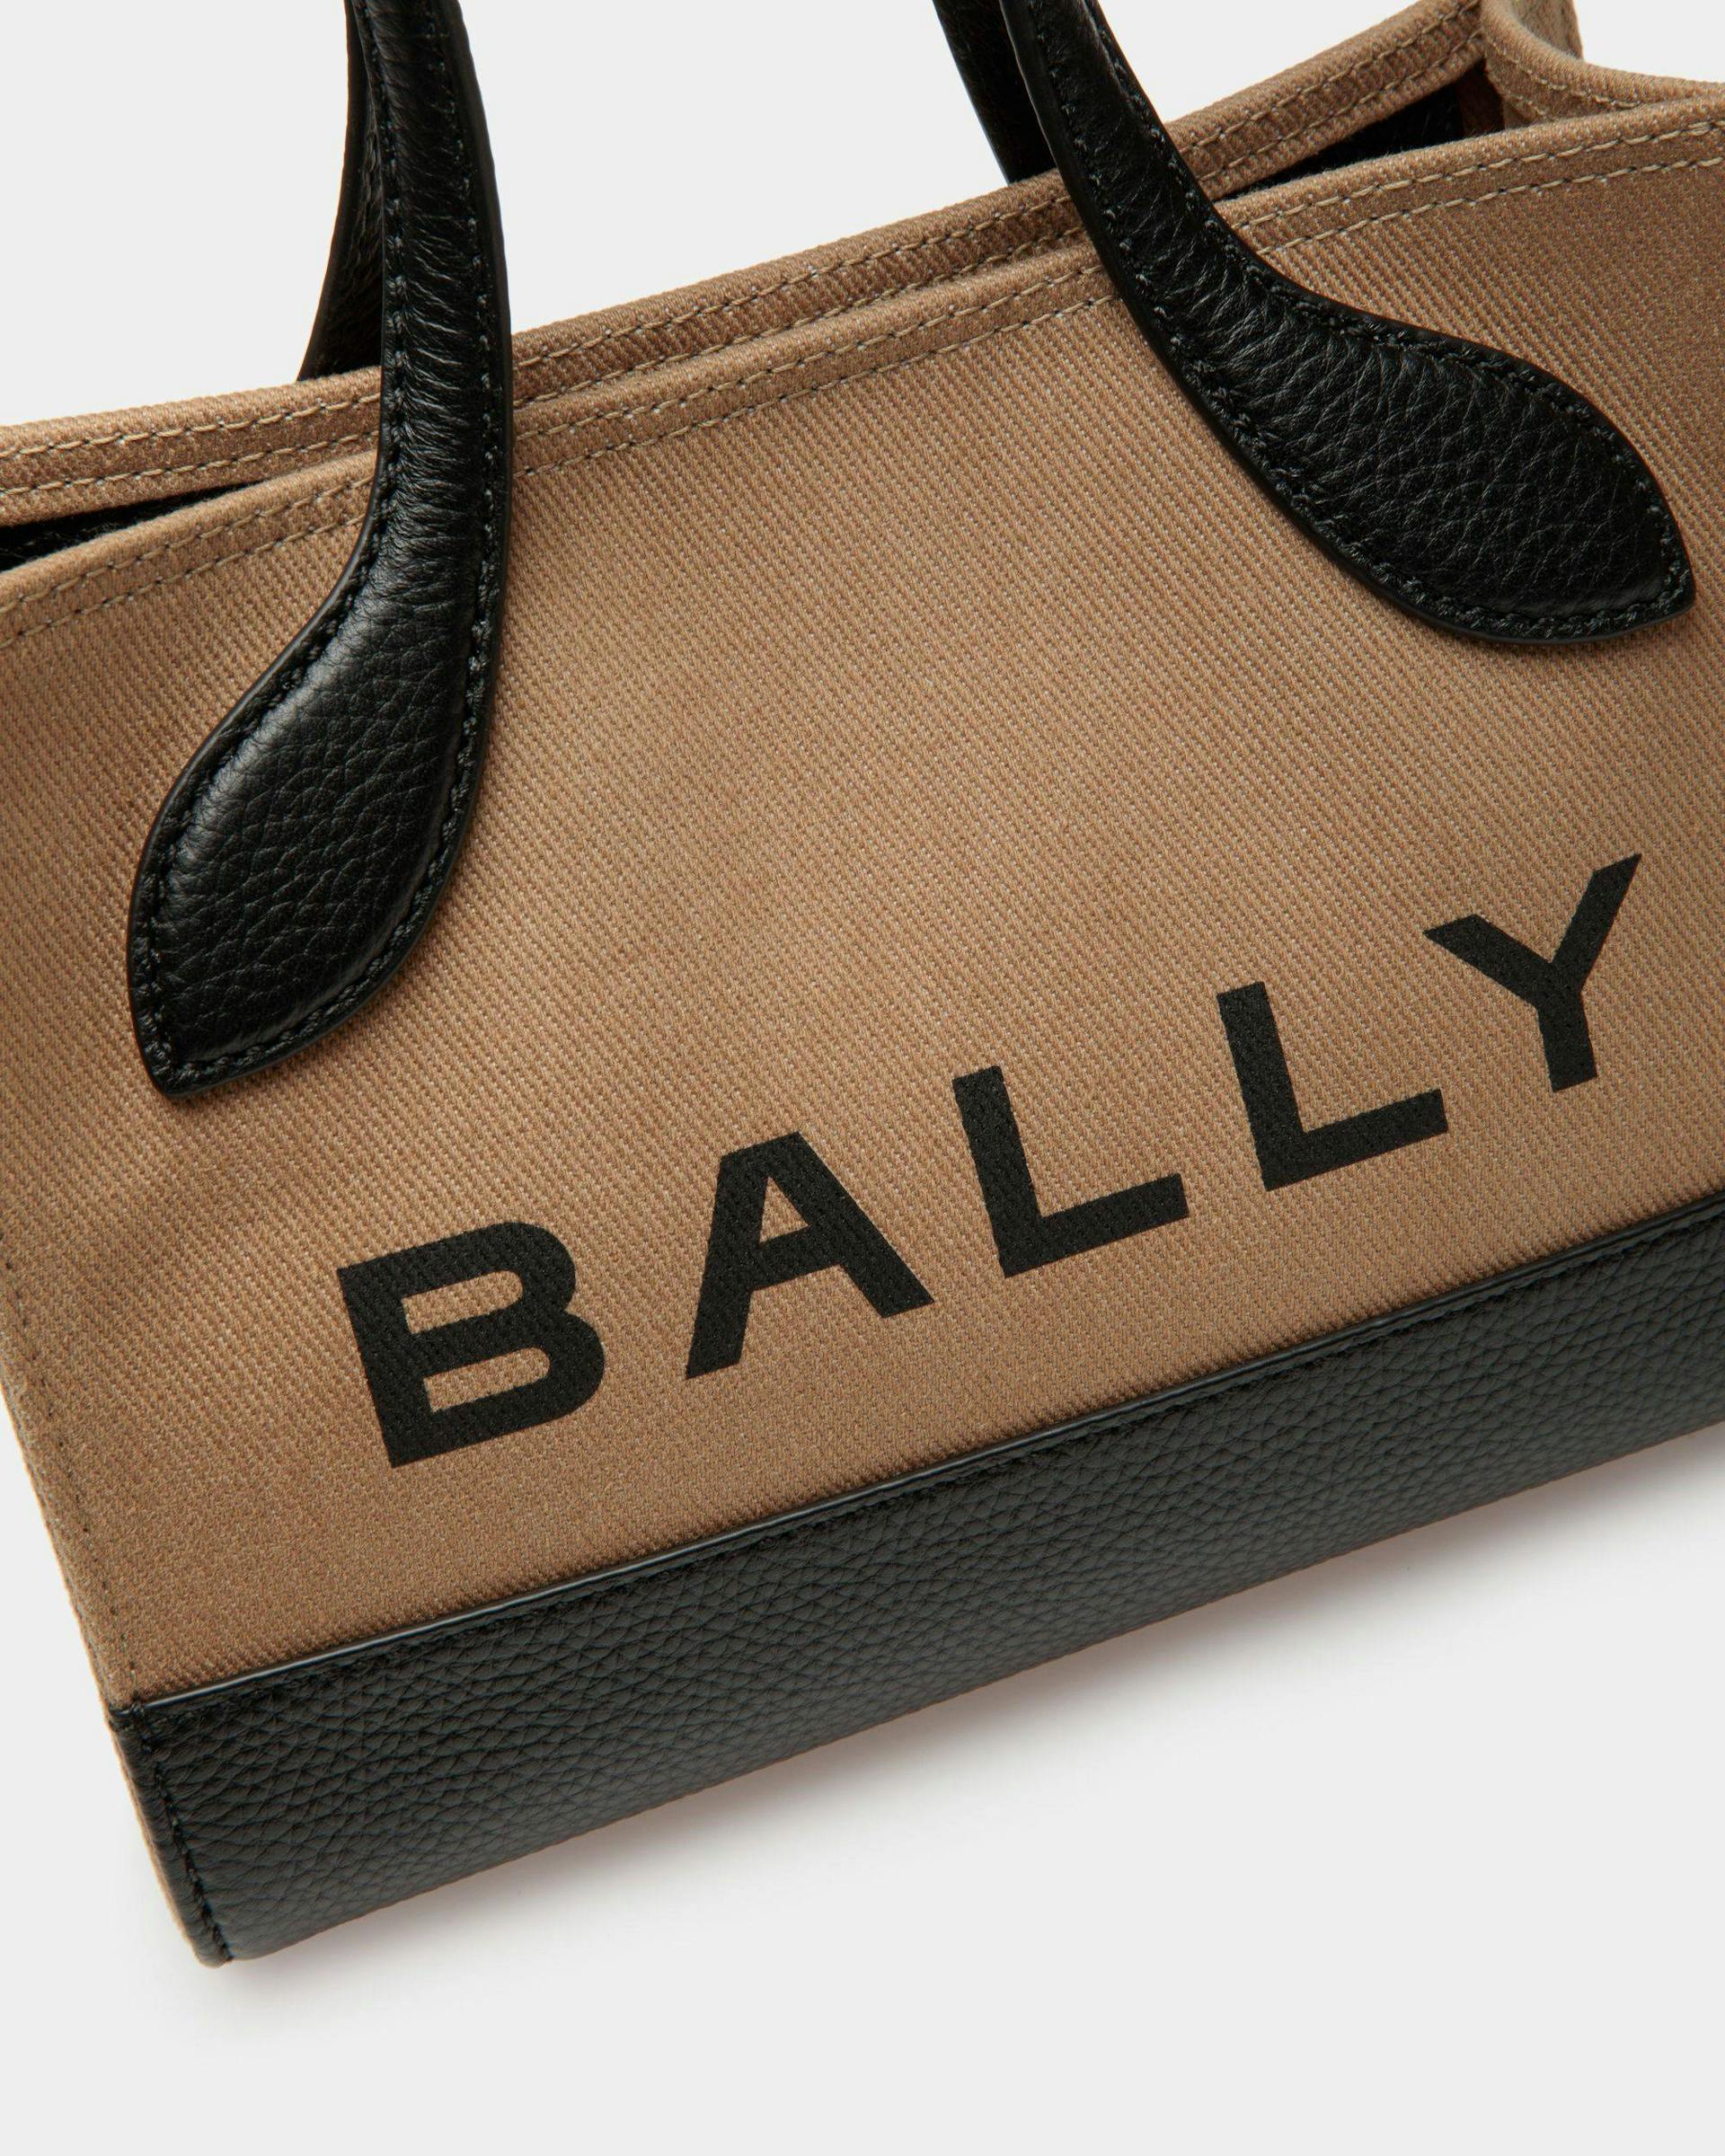 Women's Bar Minibag In Sand And Black Fabric | Bally | Still Life Detail